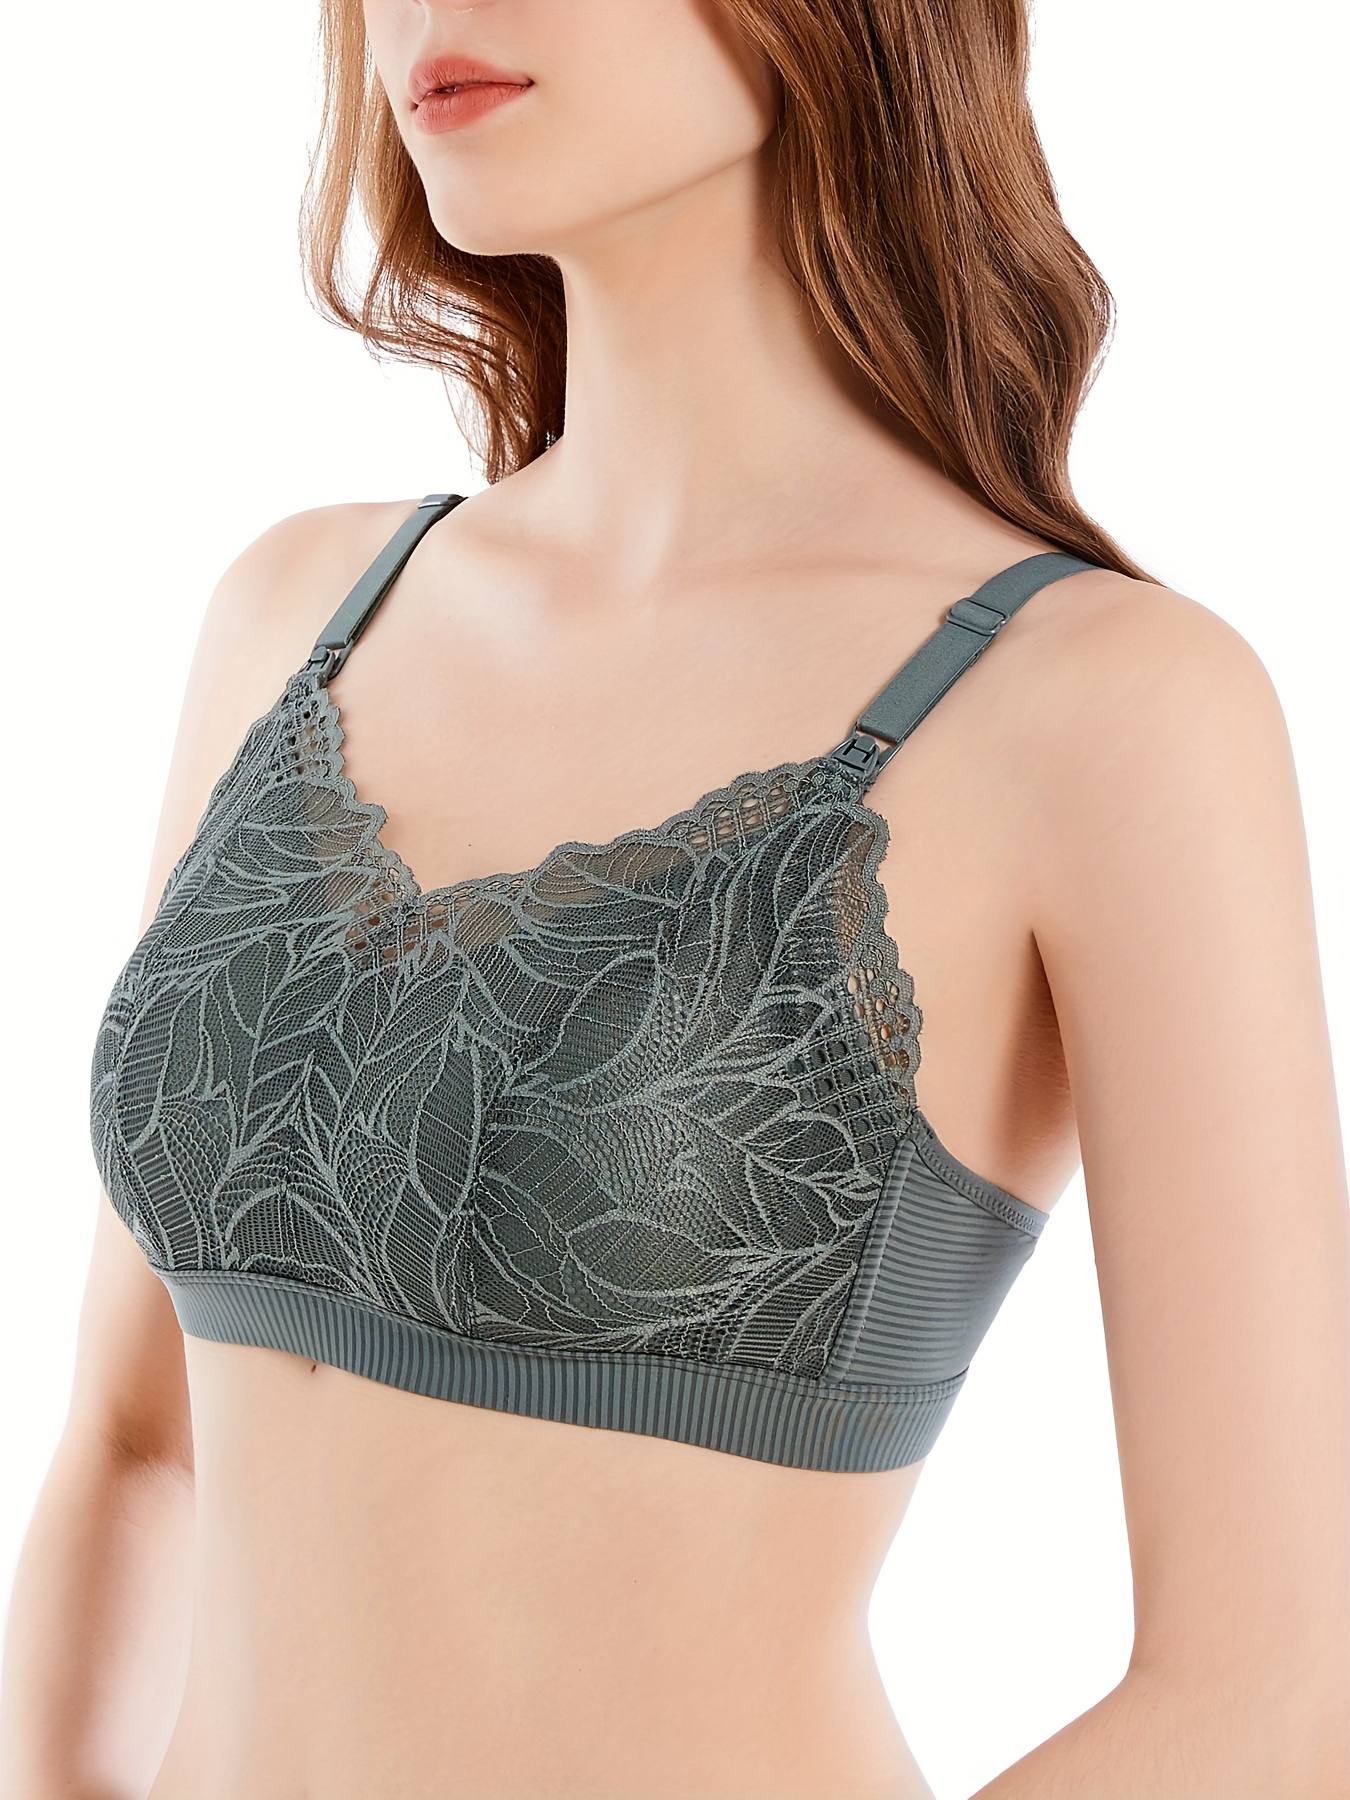 HOT】 Wireless Front Open Nursing Bra Soft Lace Breathable